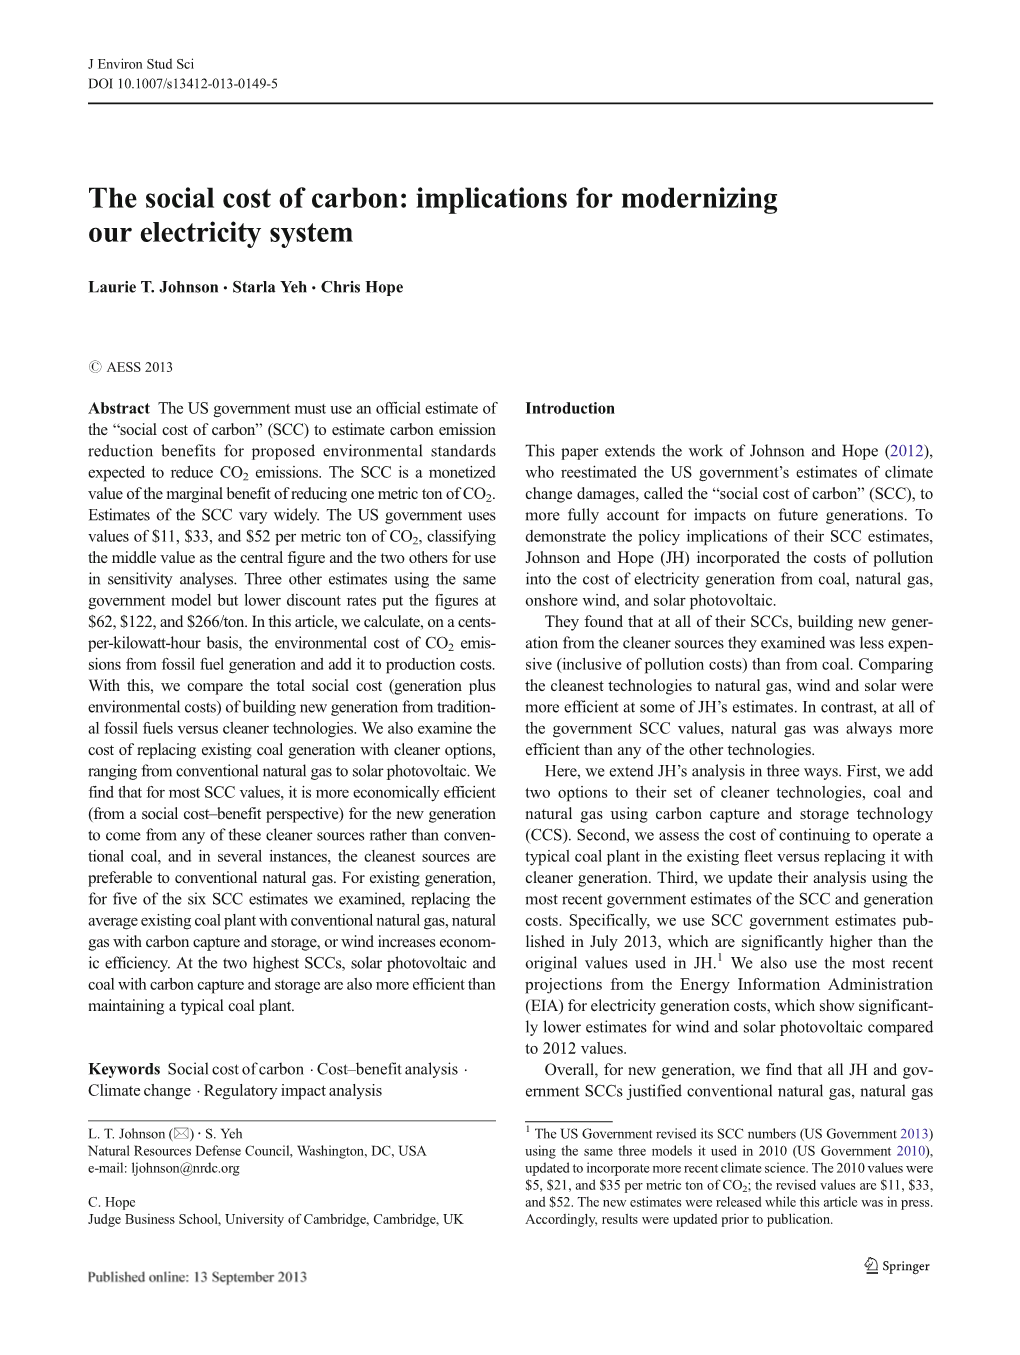 The Social Cost of Carbon: Implications for Modernizing Our Electricity System